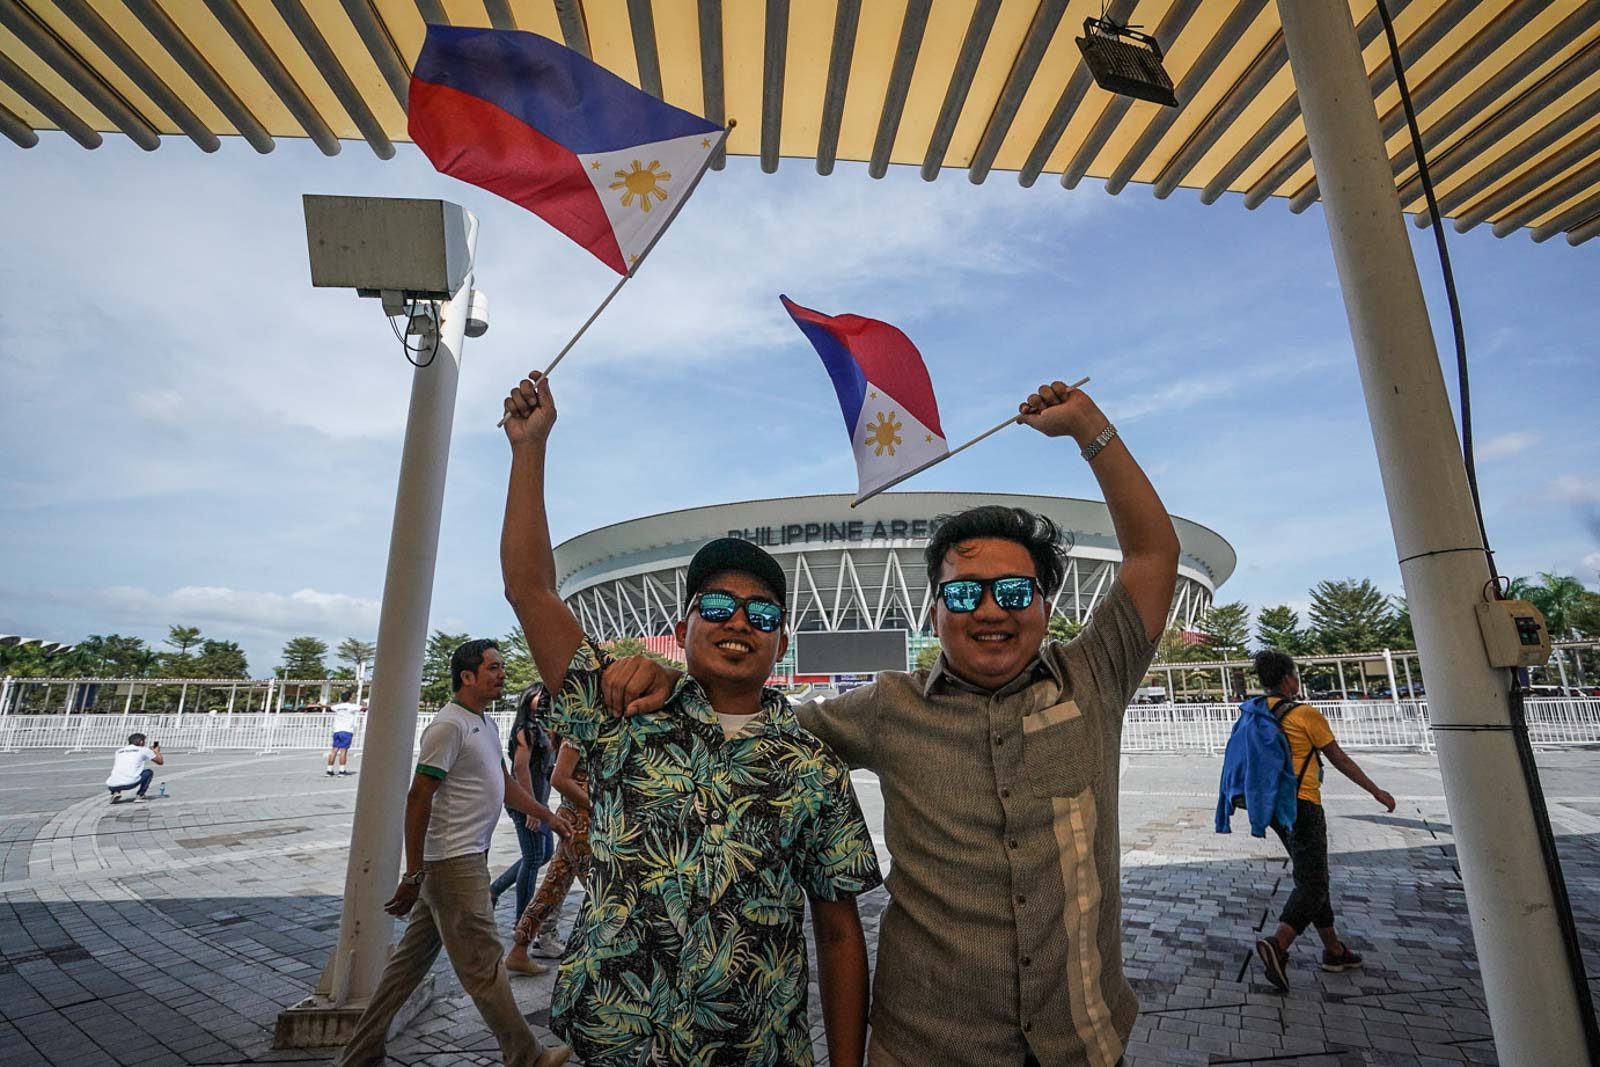 SEA Games 2019: Expect a ‘Super Bowl halftime’ opening show